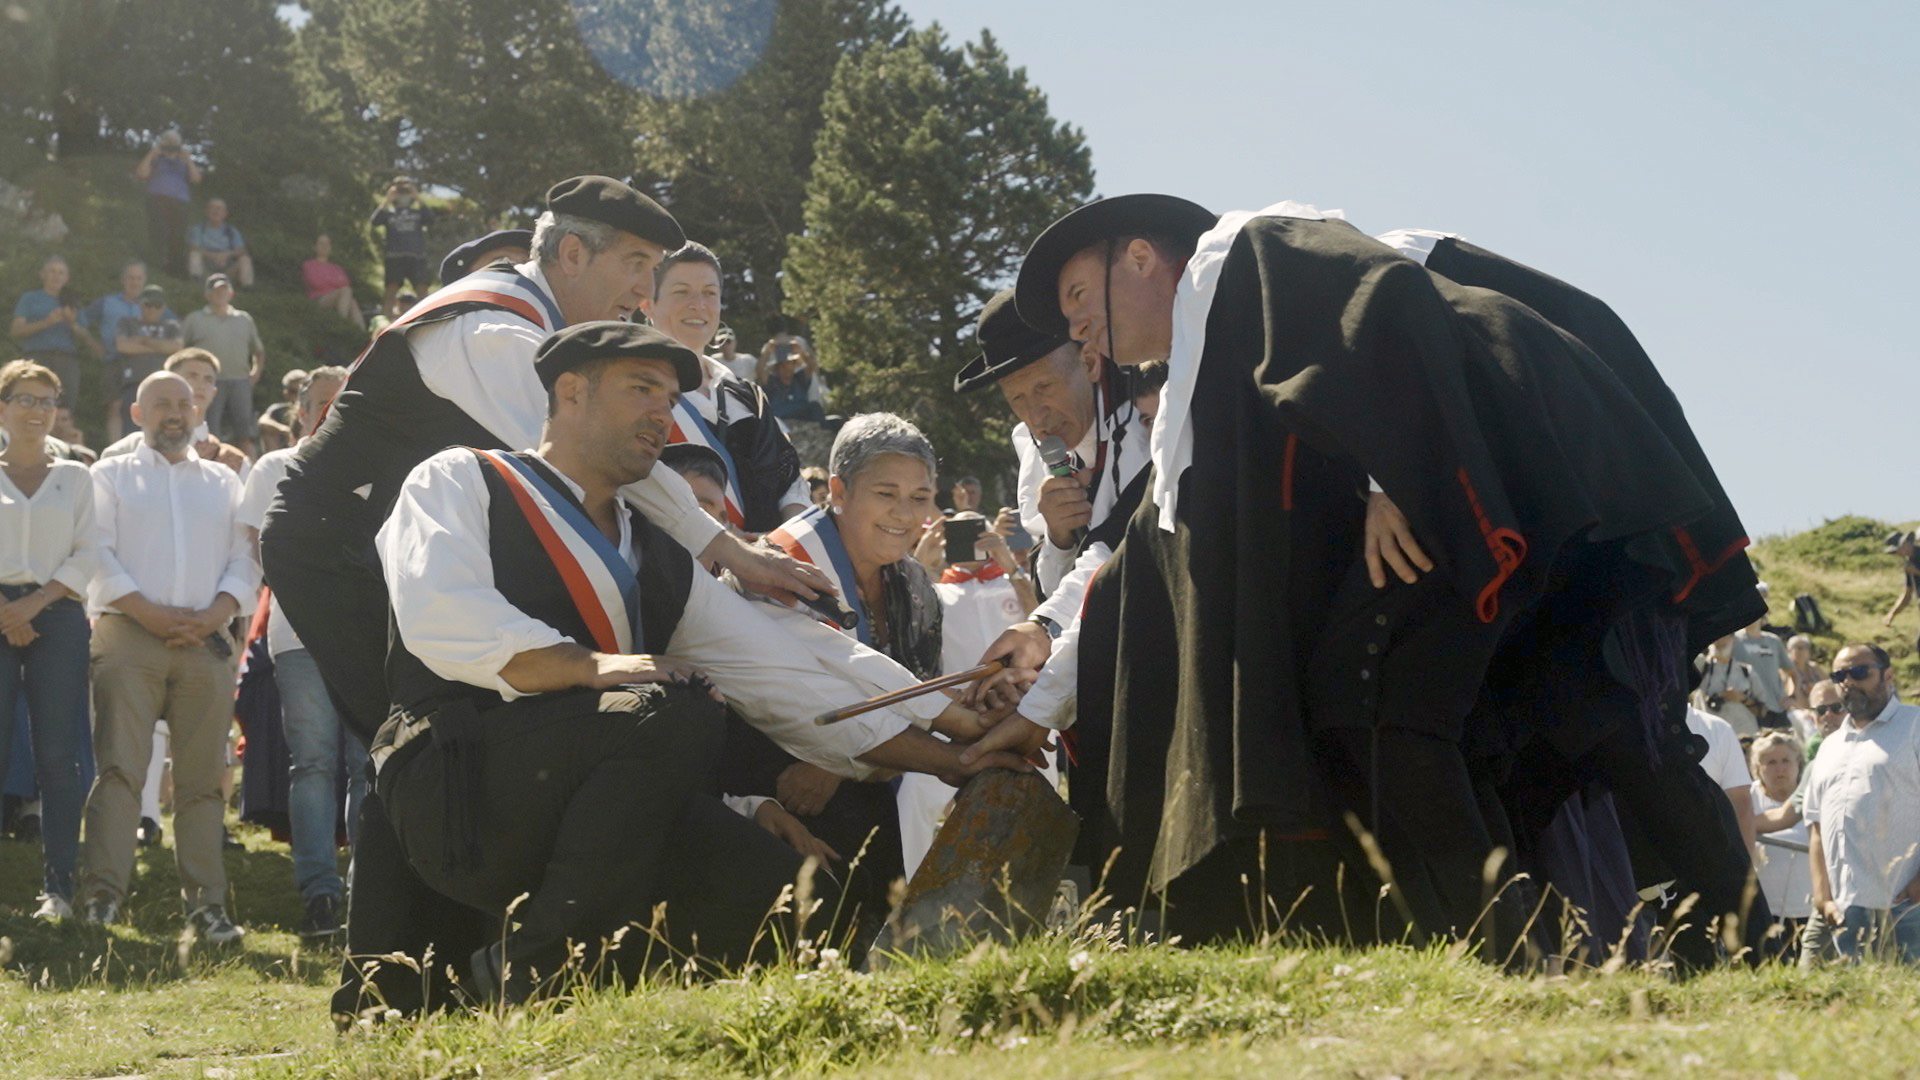 Representatives from the Roncal and Baretous valleys perform a ceremony to honour a centuries-old treaty.